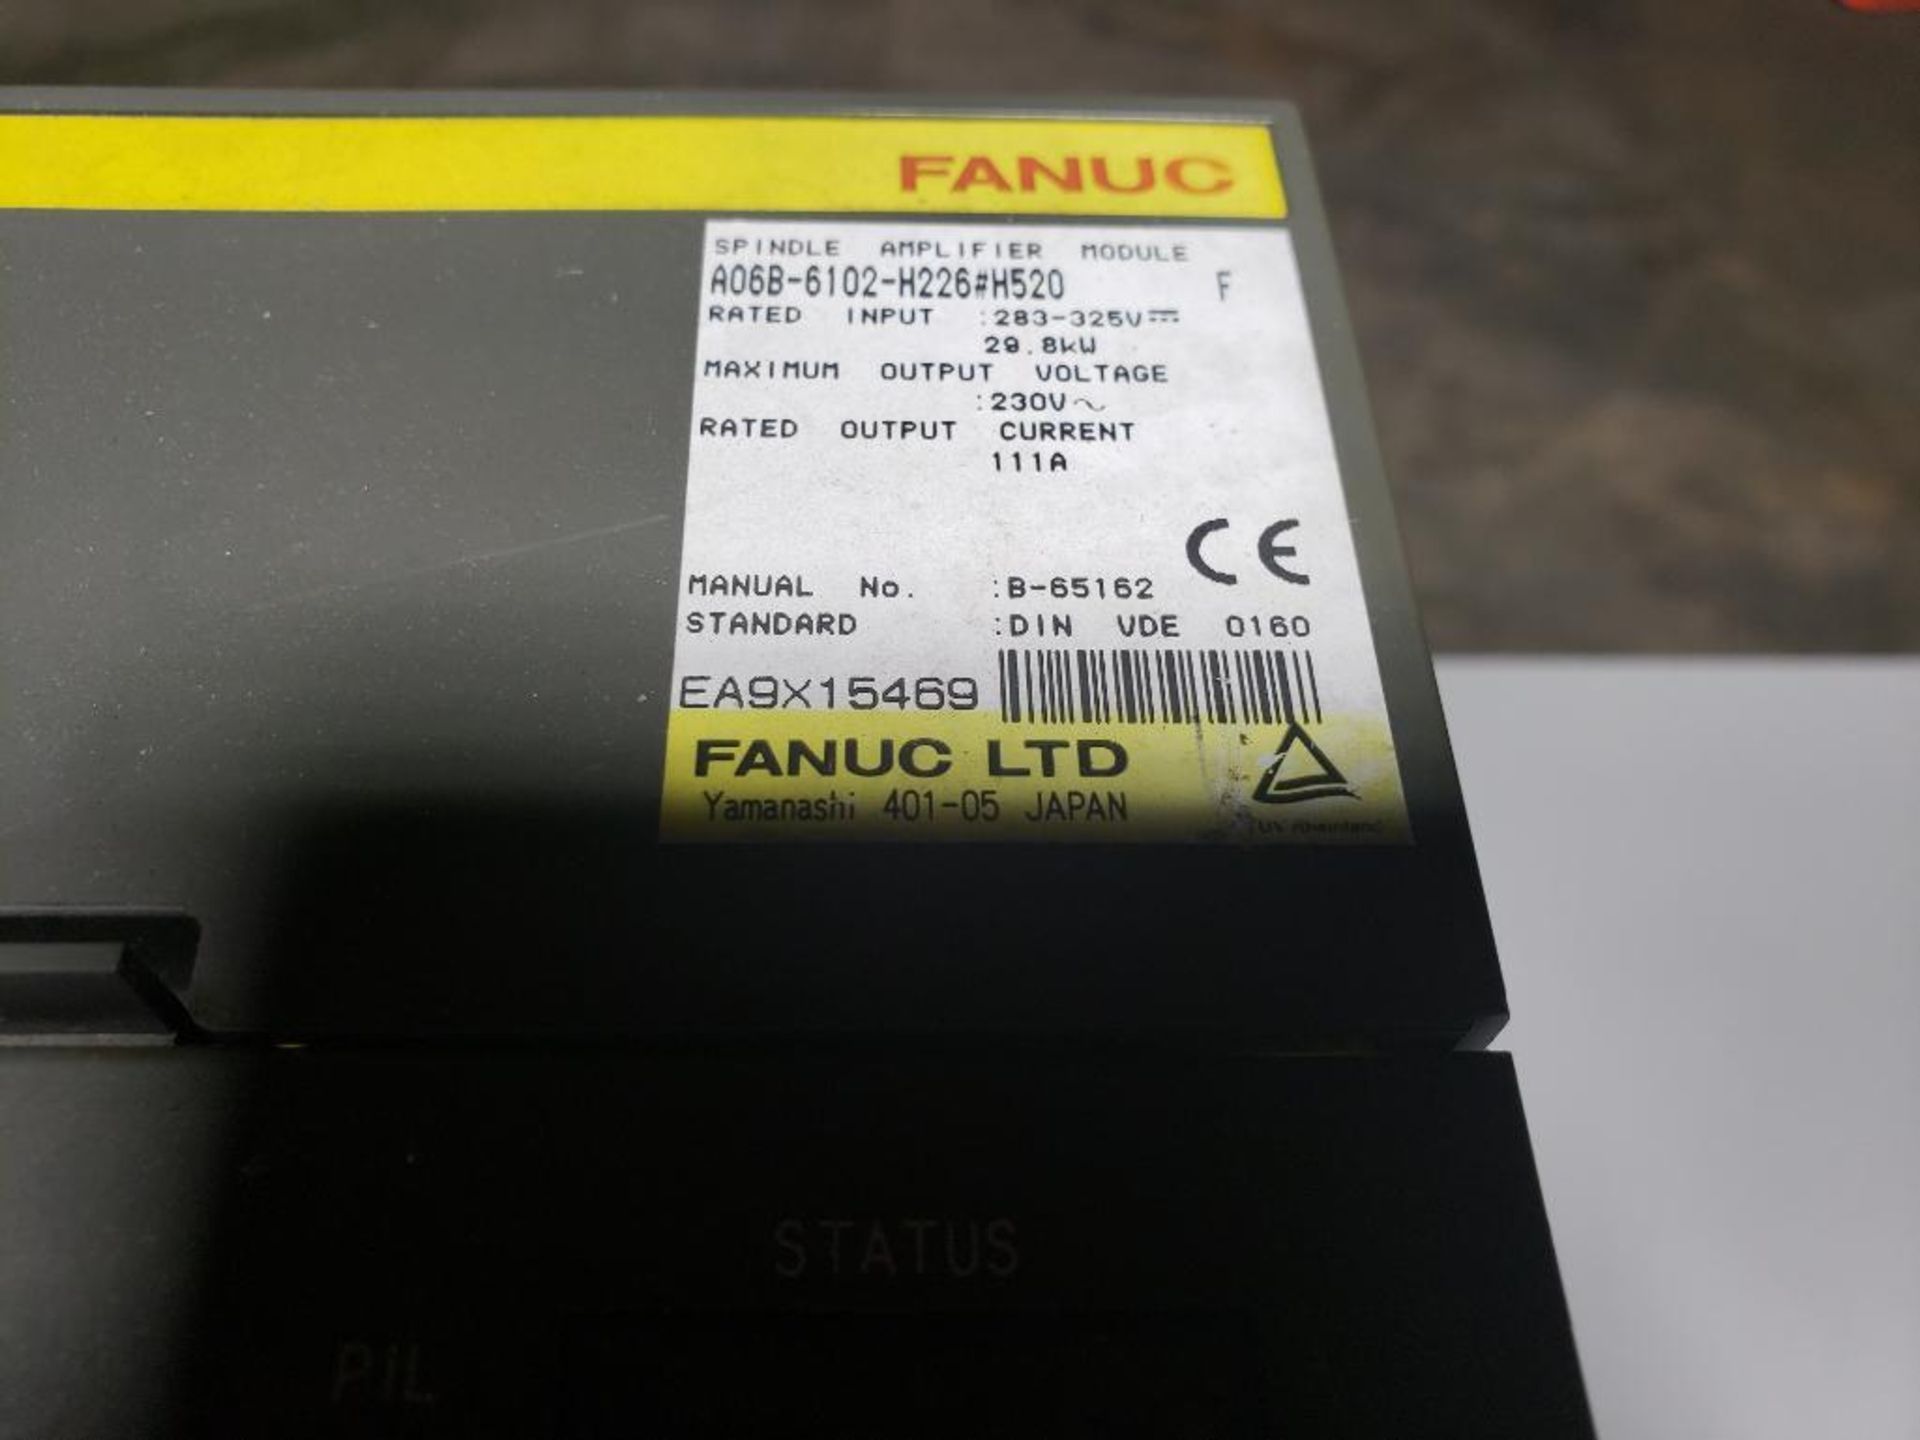 Fanuc spindle amplifier module. Part number A06B-6102-H226. - Image 2 of 5